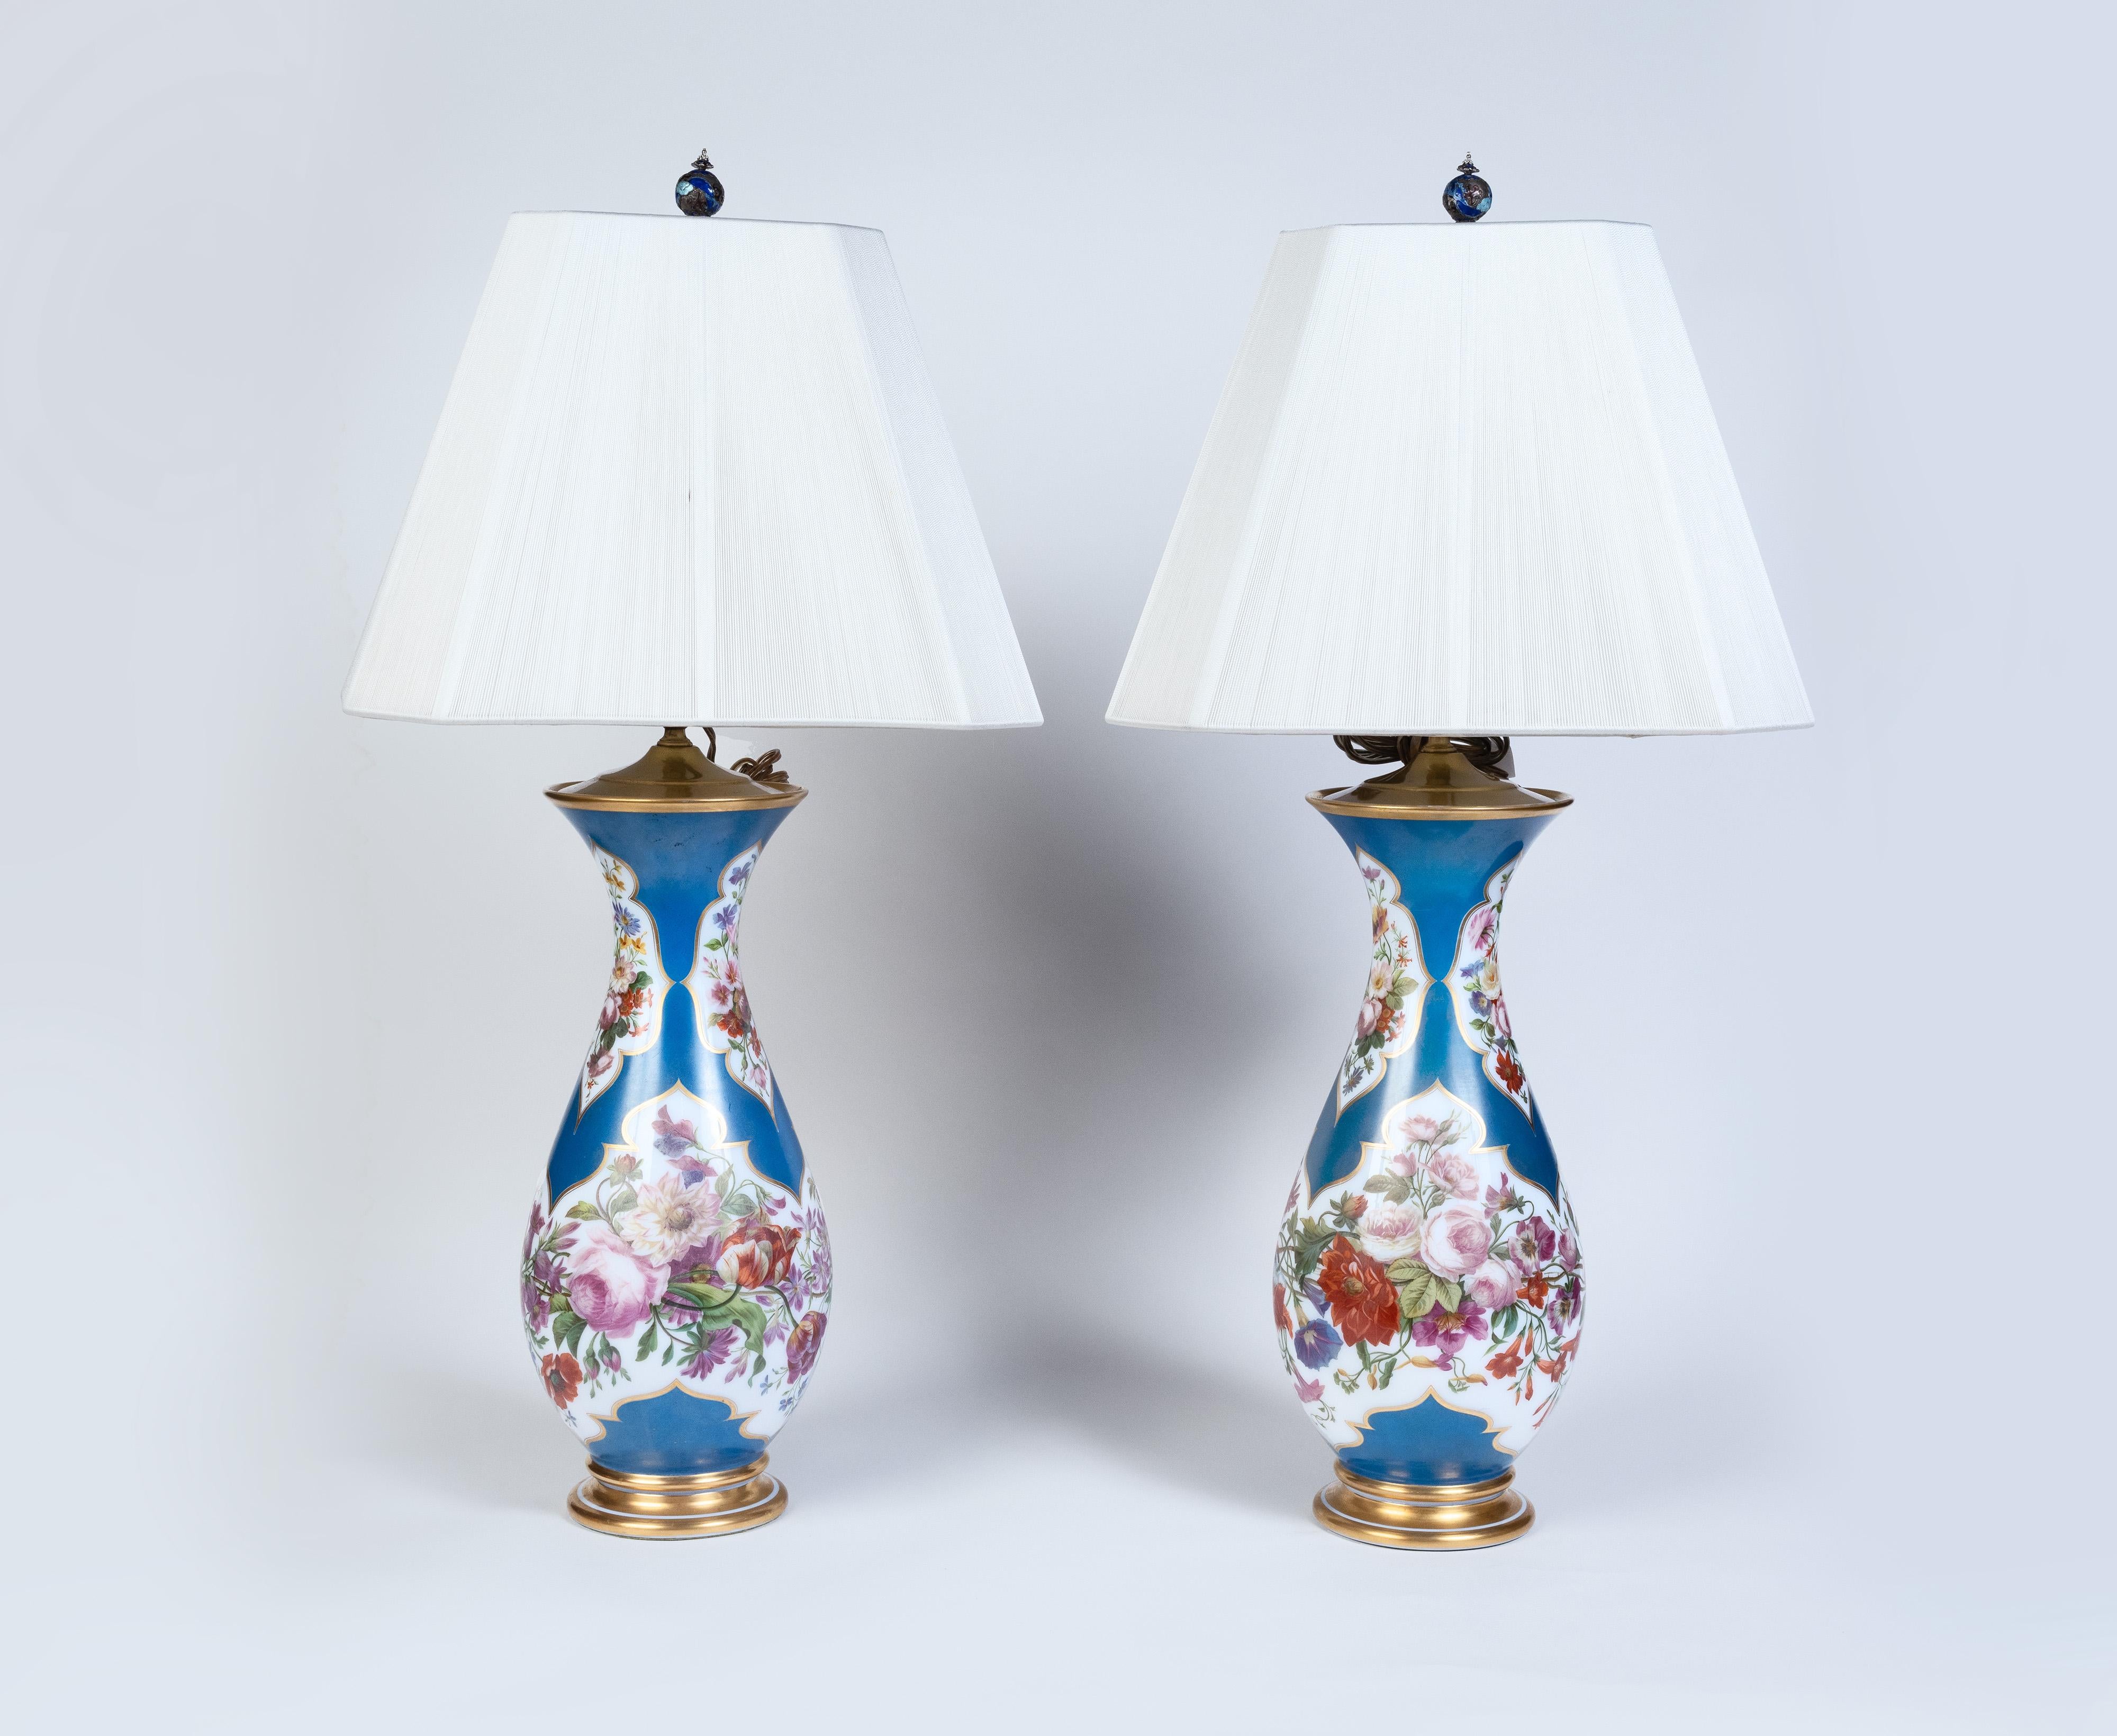 Napoleon III A Large Pair of French Baccarat Opaline Glass Vases / Lamps, 19th Century For Sale